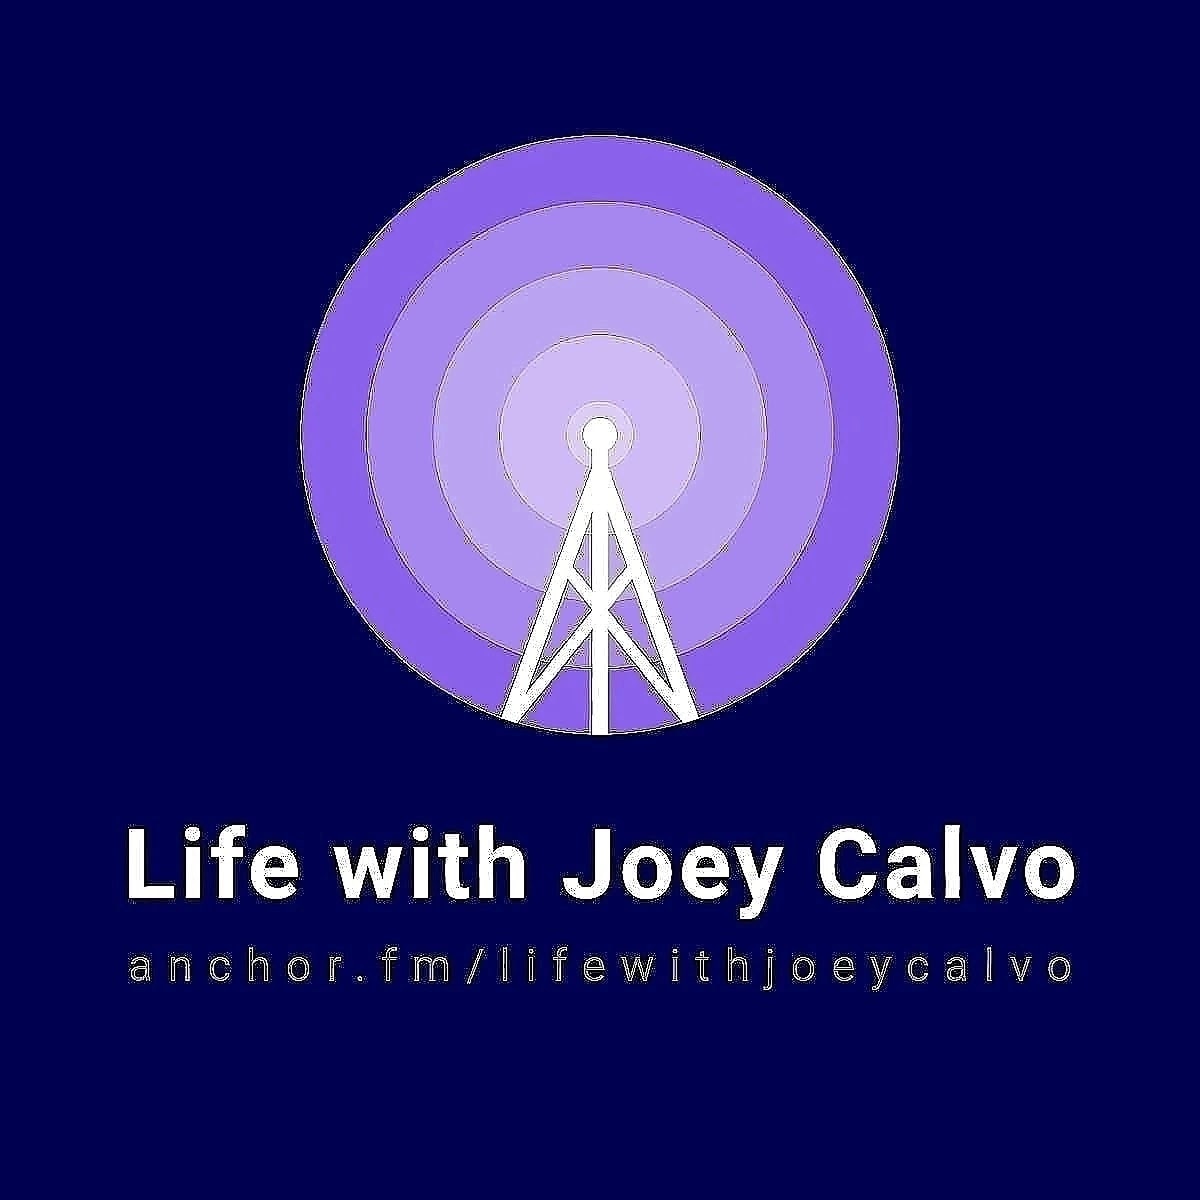 WOW!!!!!!!

January is going to be a truly busy podcast month!!!!!

Thursday, 1/11:

12pm ET: Sacha Awwa
3pm ET: Dana Walker Inskeep

January 25th:
12pm ET: @t_sidf Terry Sidford

Join me live on the Life with Joey Calvo YouTube channel at those times if you have questions